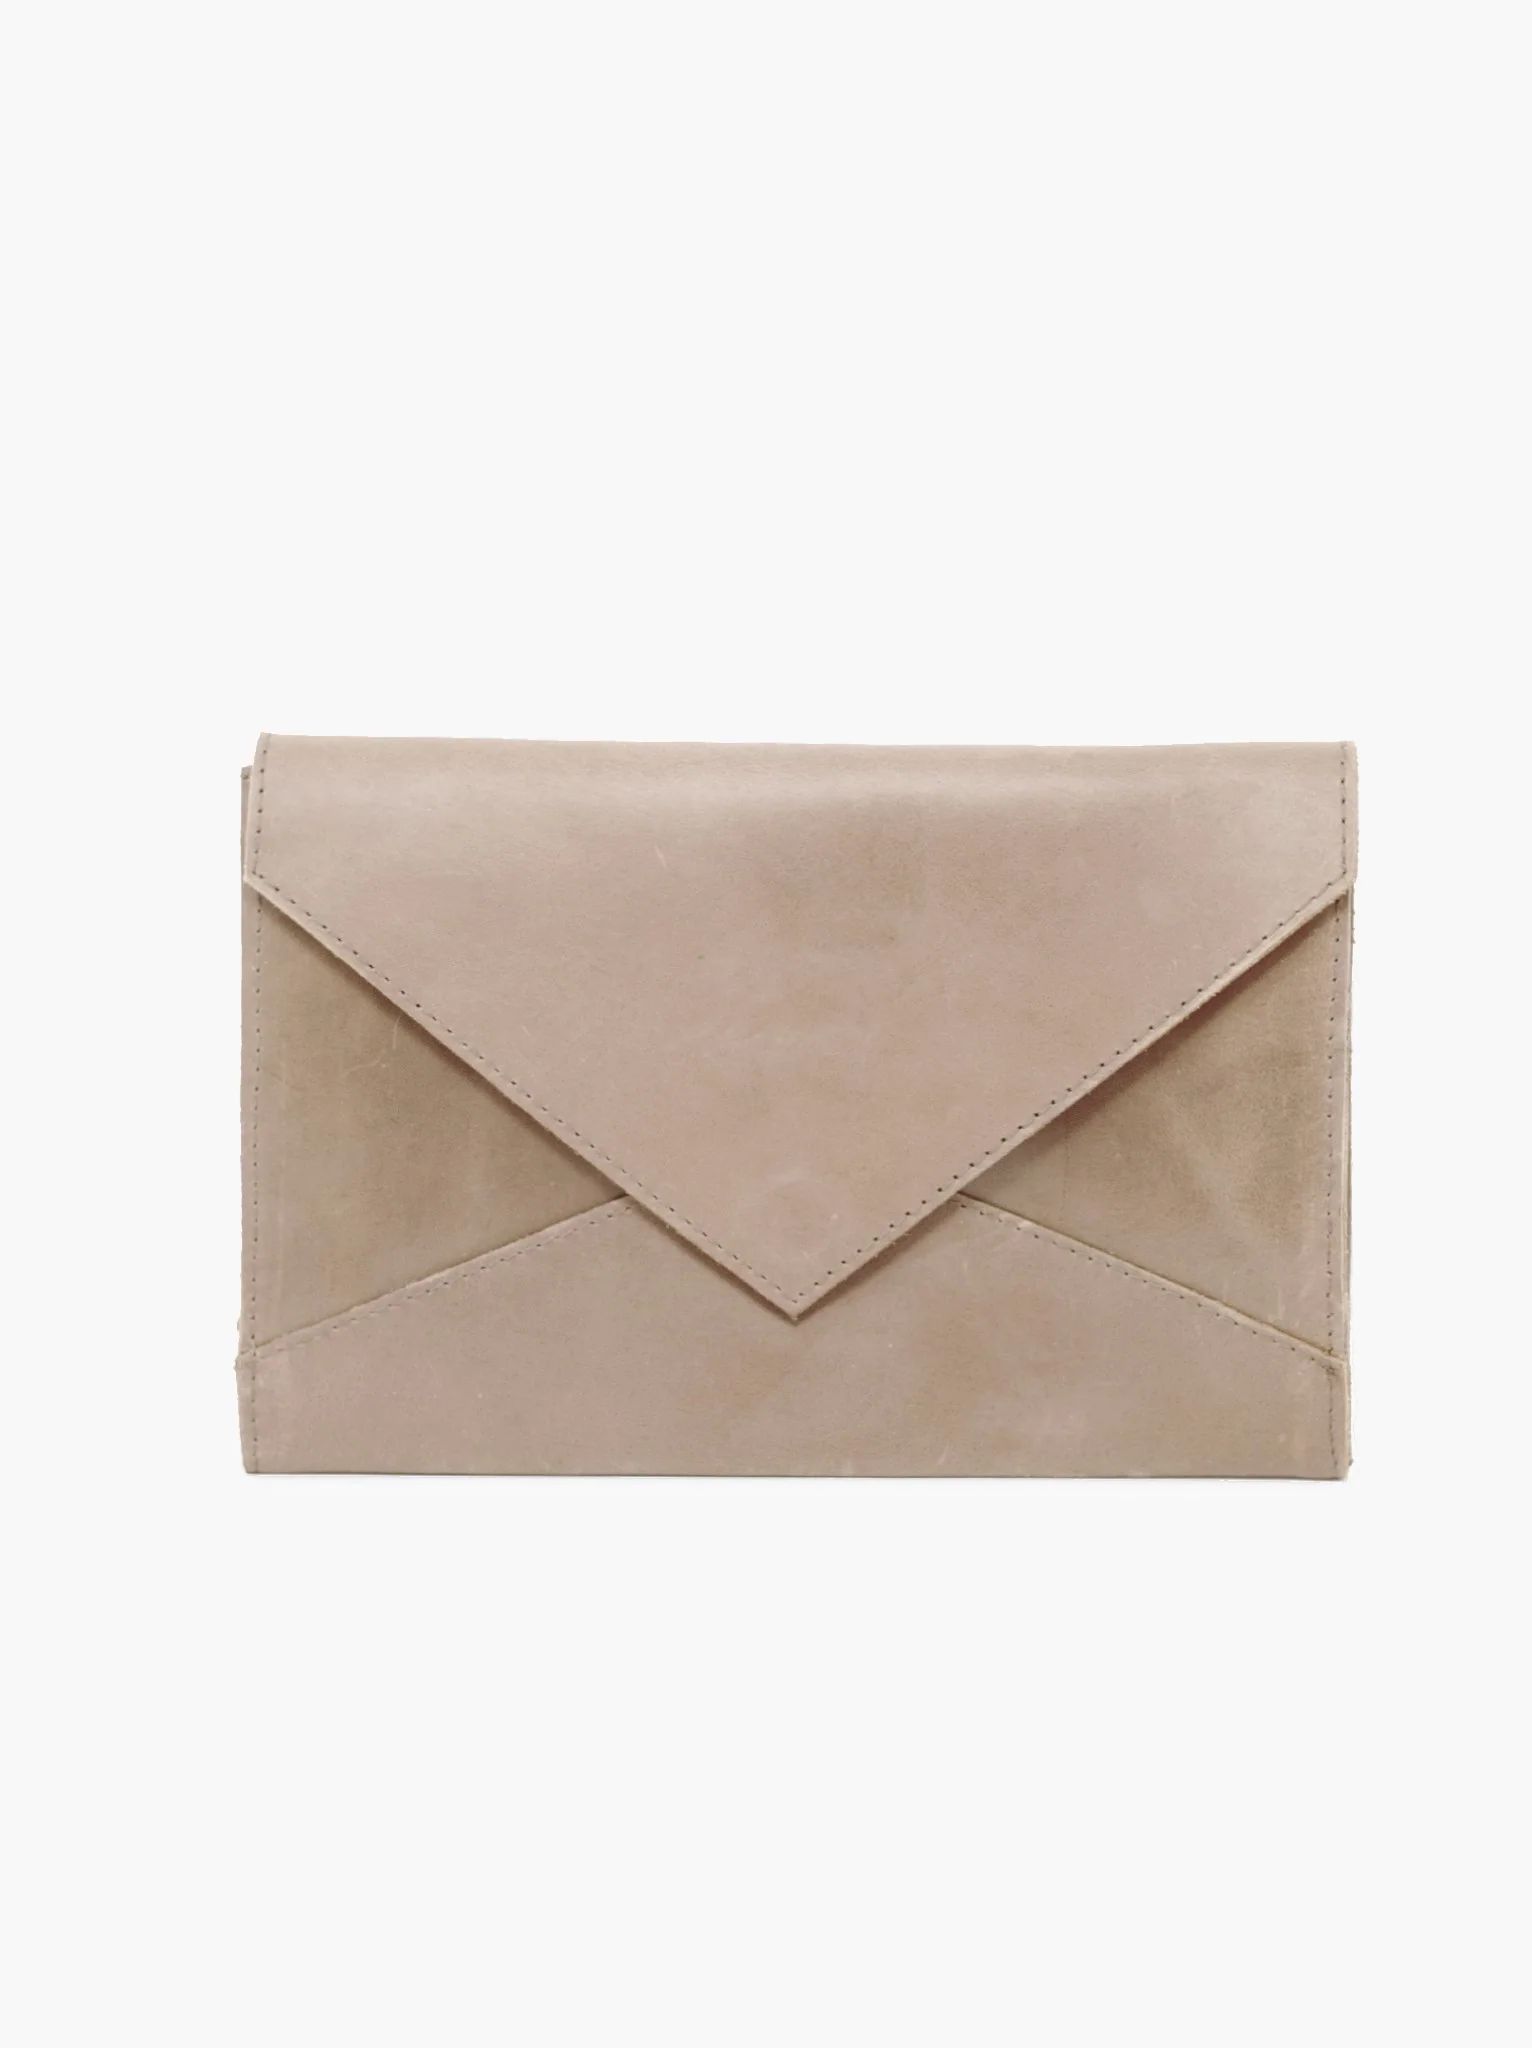 Solome Clutch | ABLE